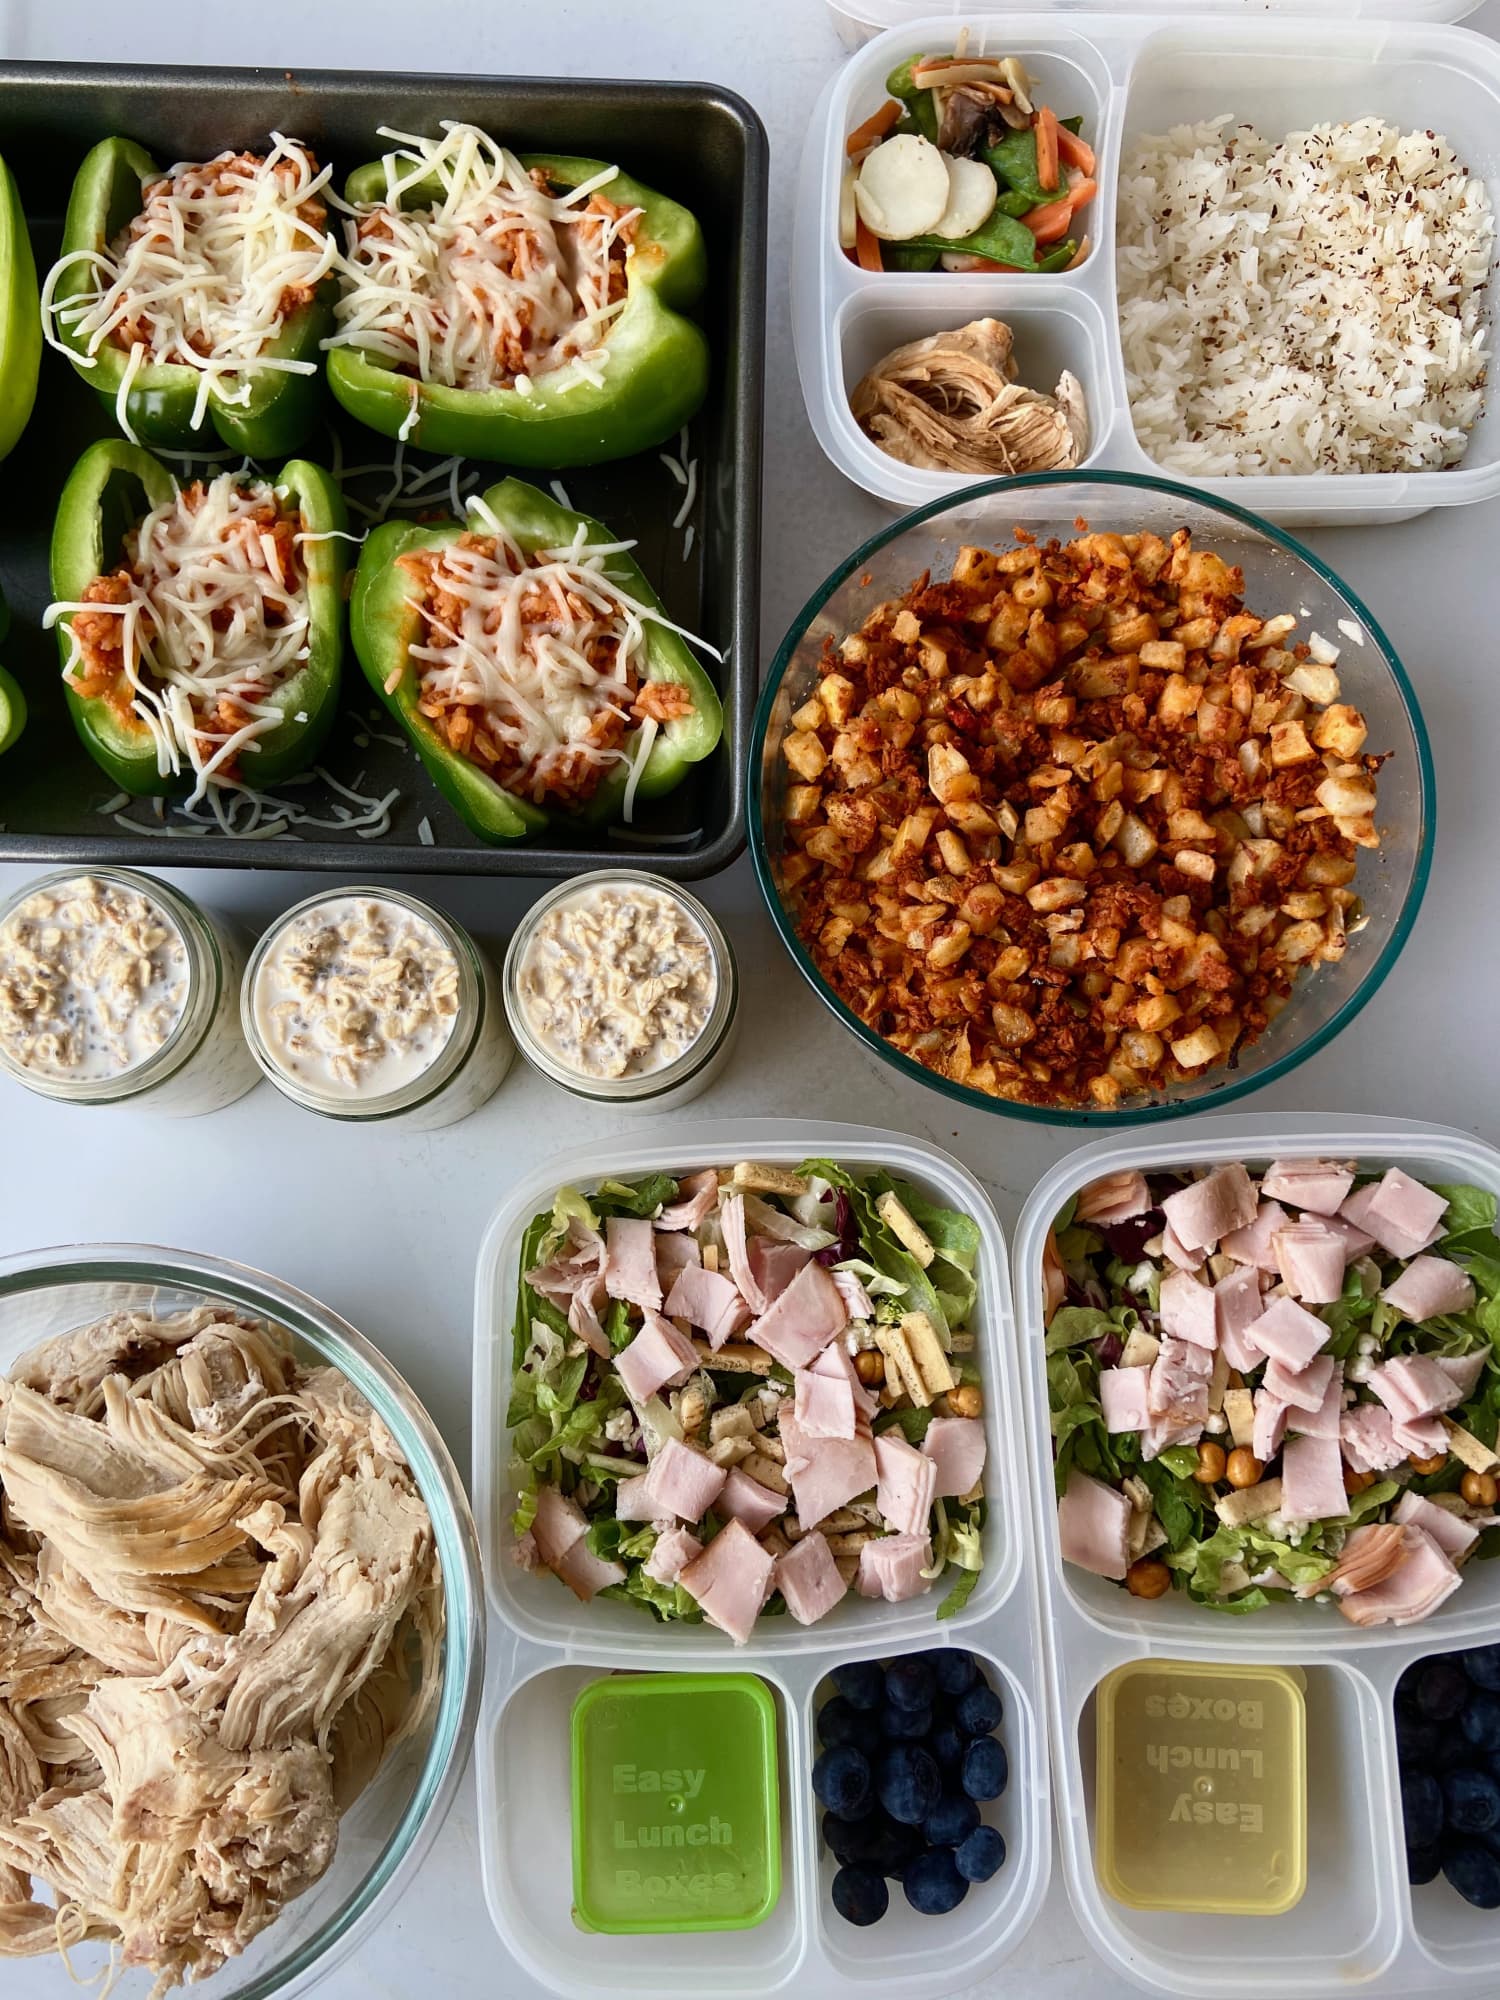 Easy $100 Trader Joe's Meal Plan for Four | Kitchn